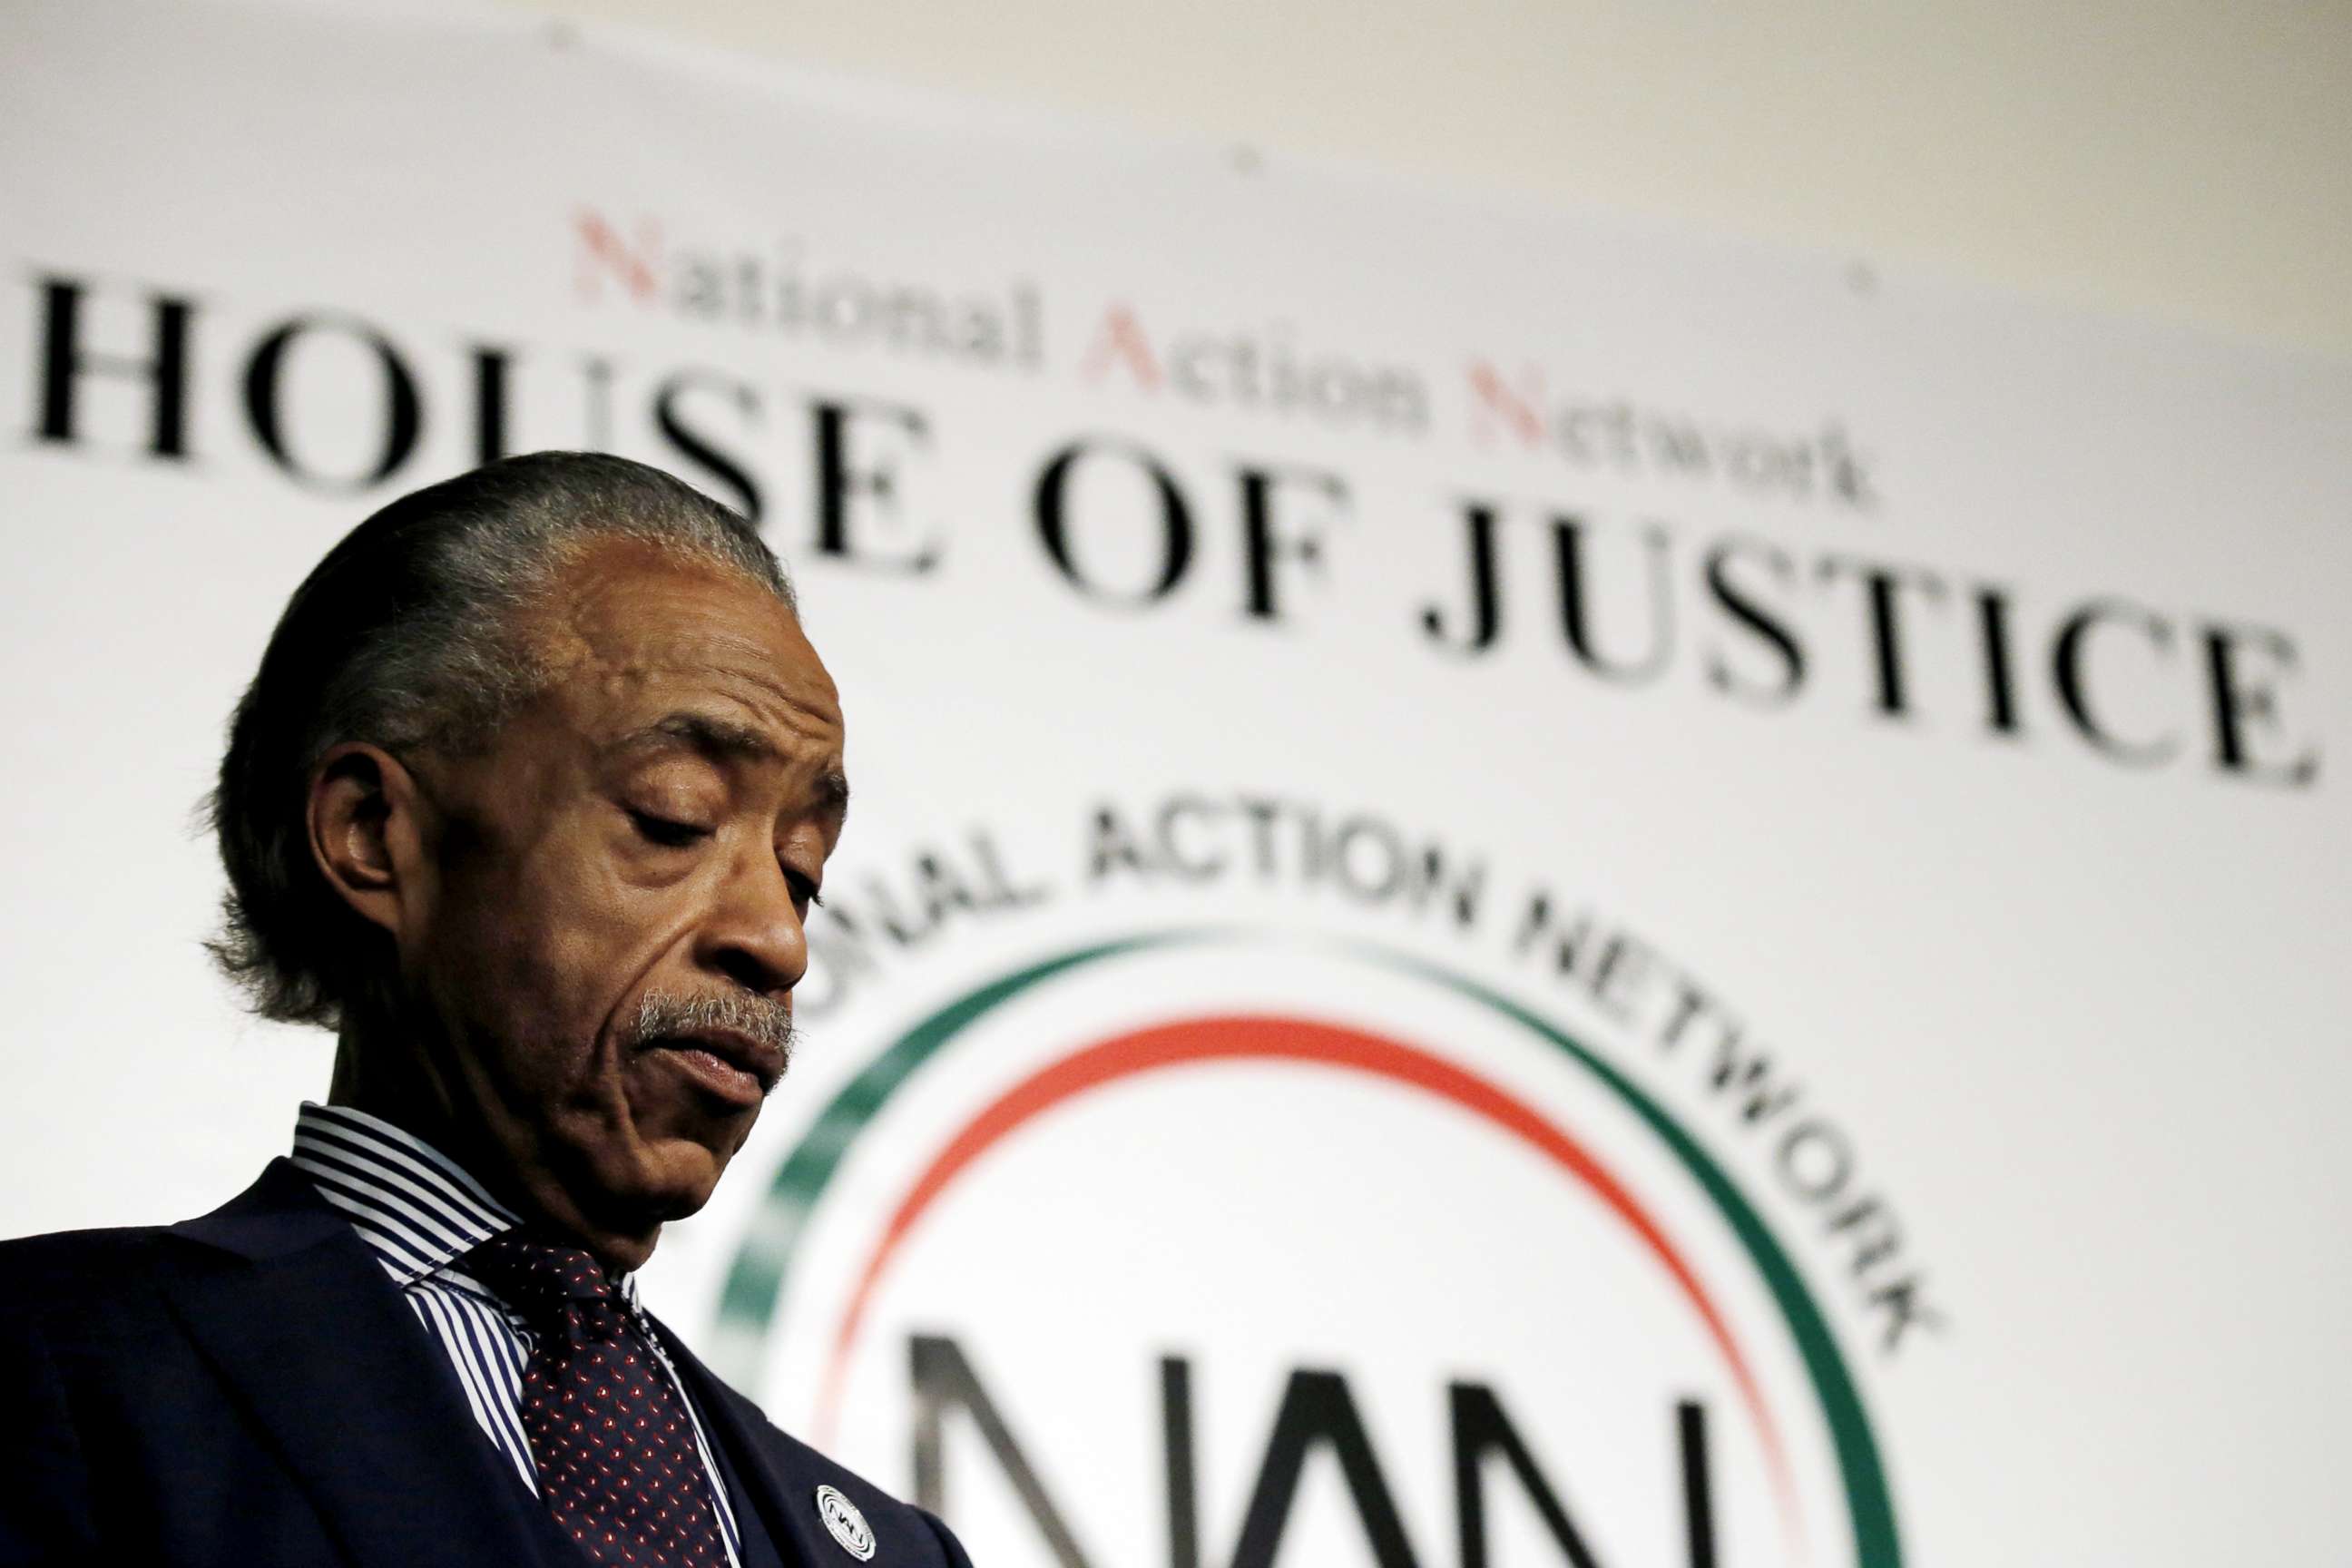 PHOTO: Reverend Al Sharpton attends the National Action Network  Dr. Martin Luther King, Jr. Day Public Policy Forum in New York in this Jan. 18, 2016 file photo.